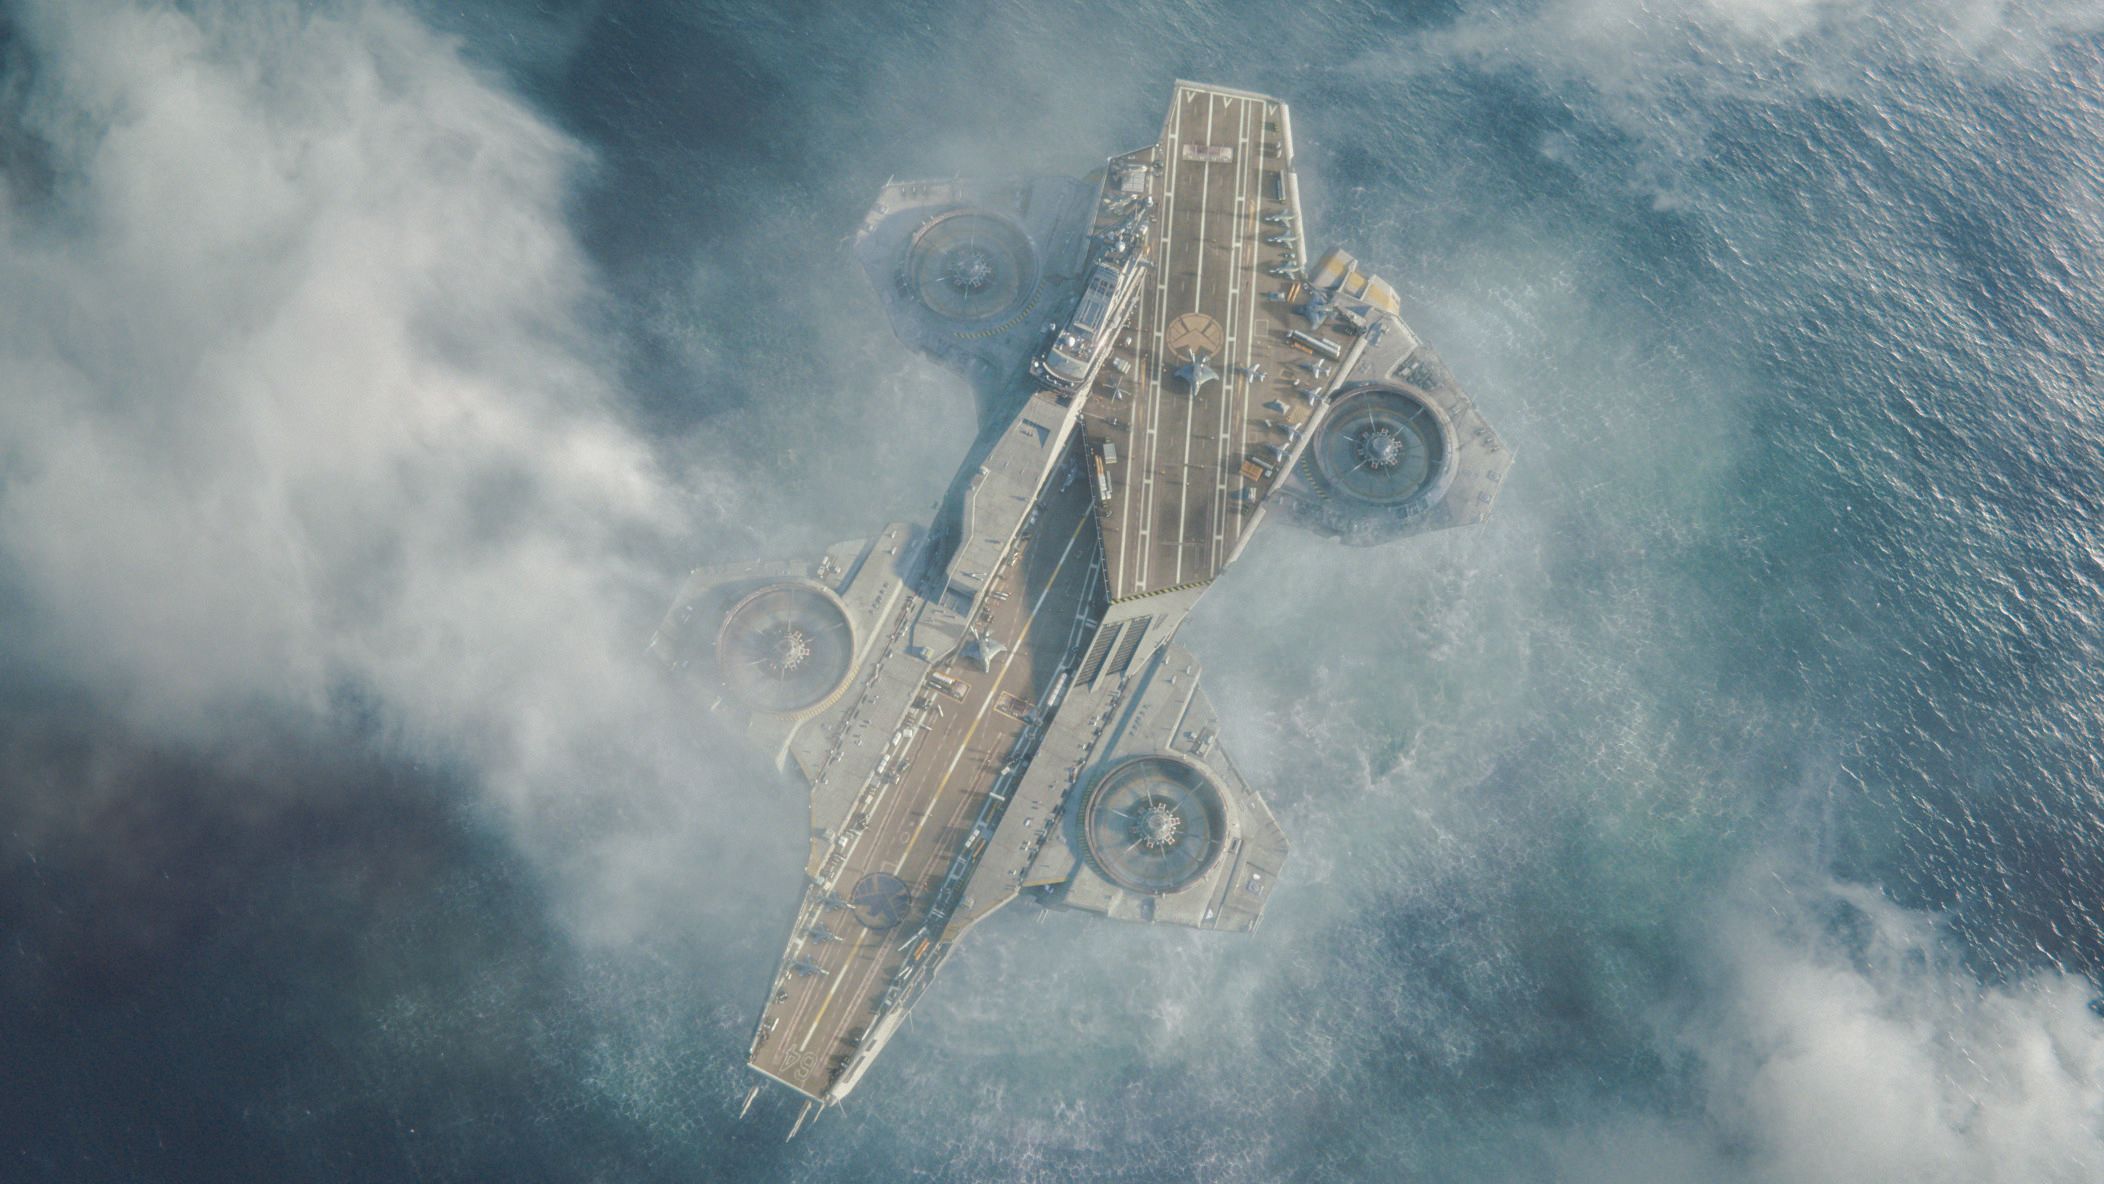 The S.H.I.E.L.D. Helicarrier in The Avengers